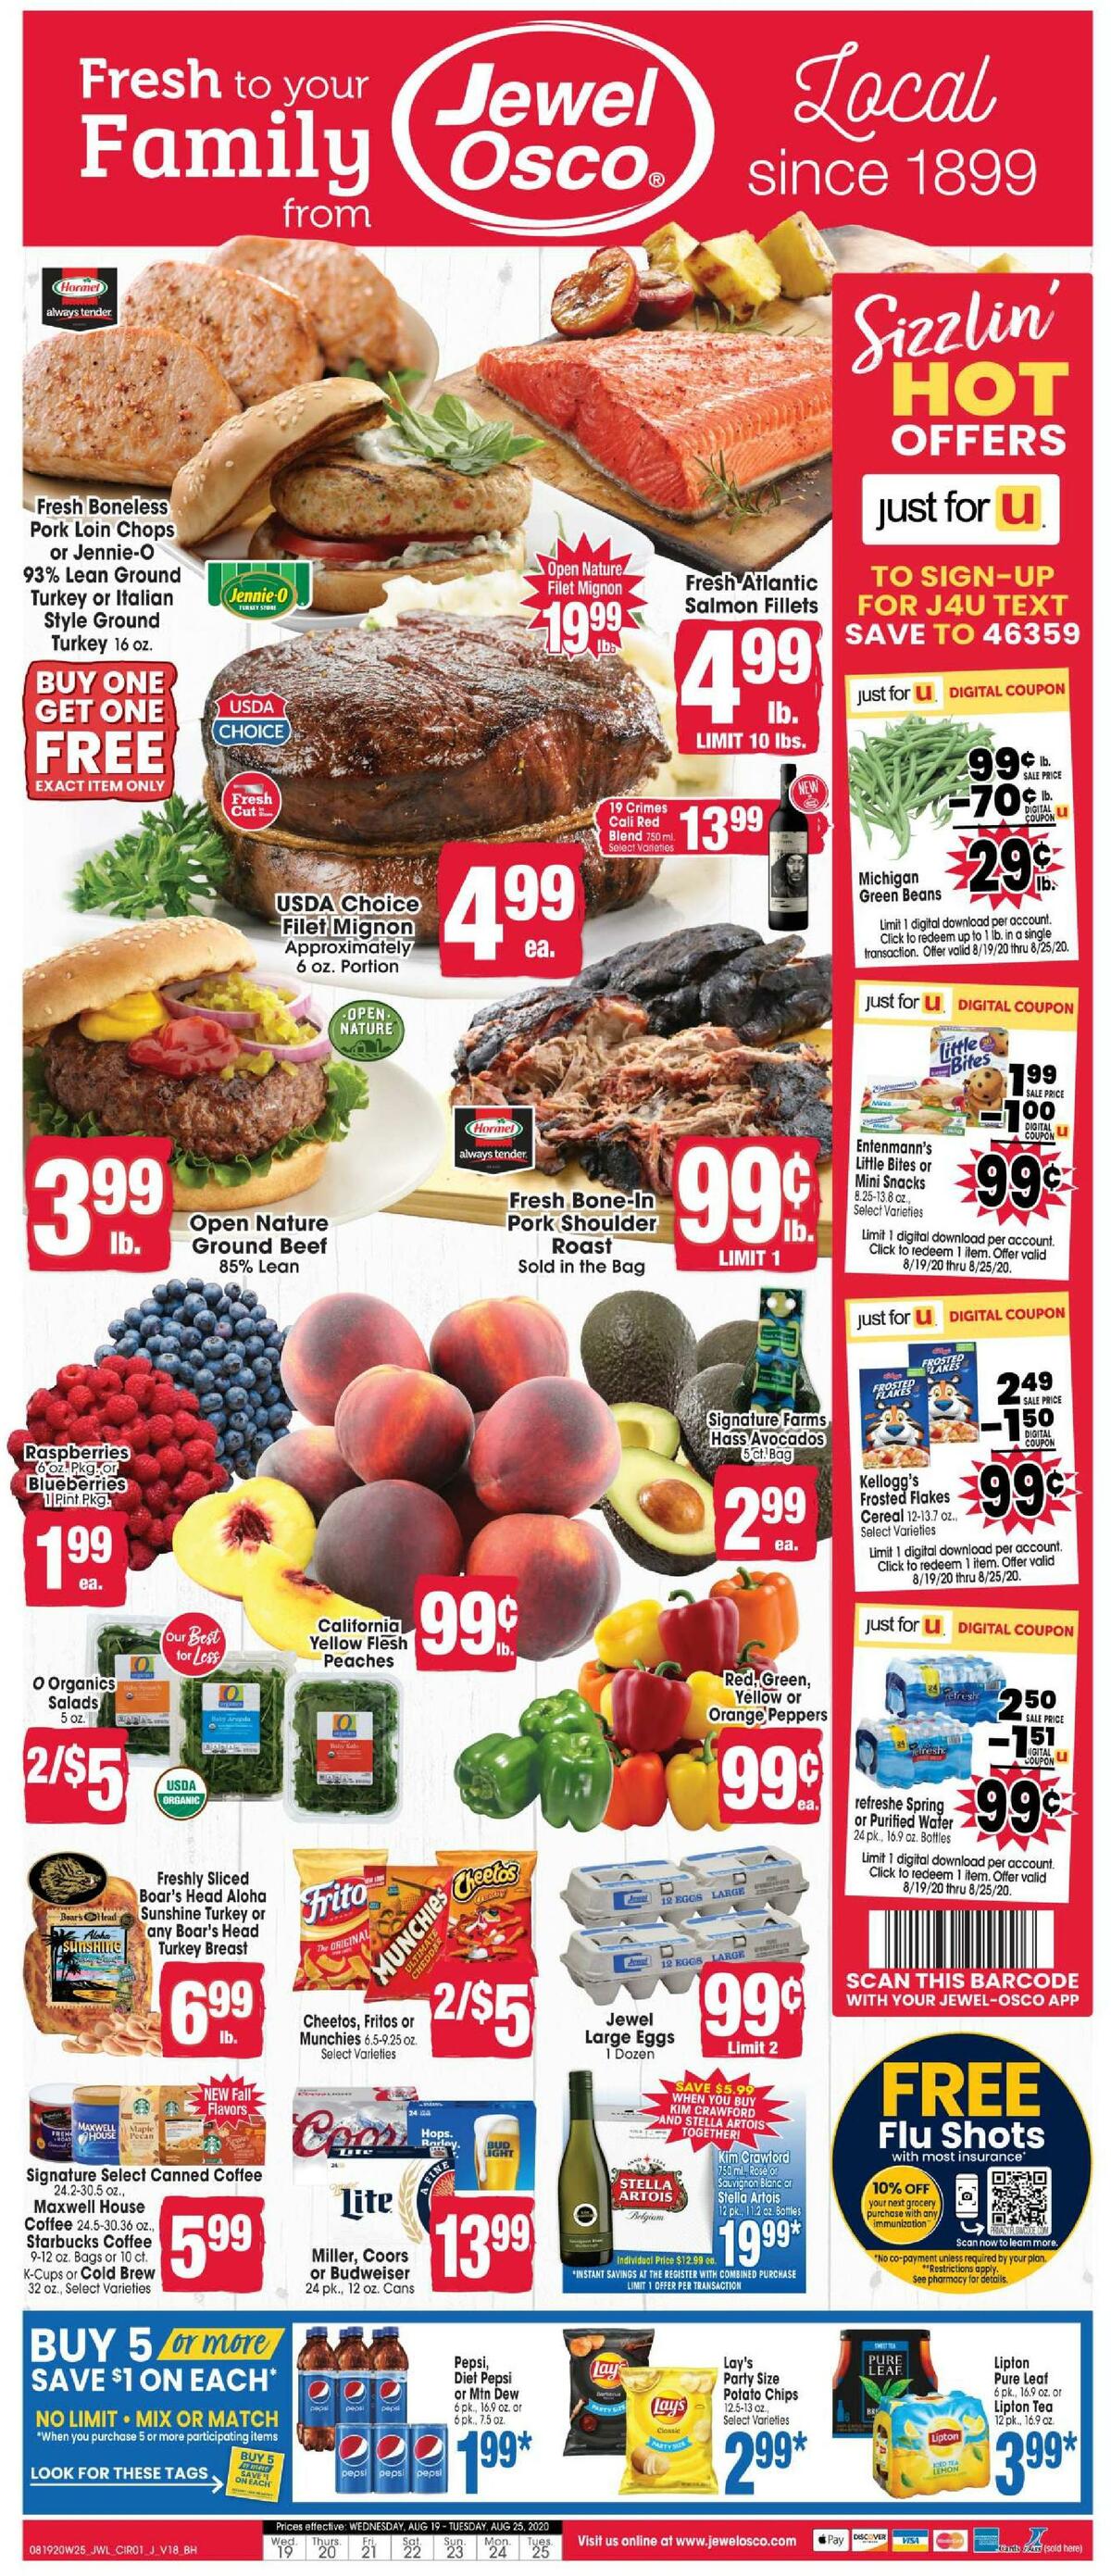 Jewel Osco Weekly Ad from August 19